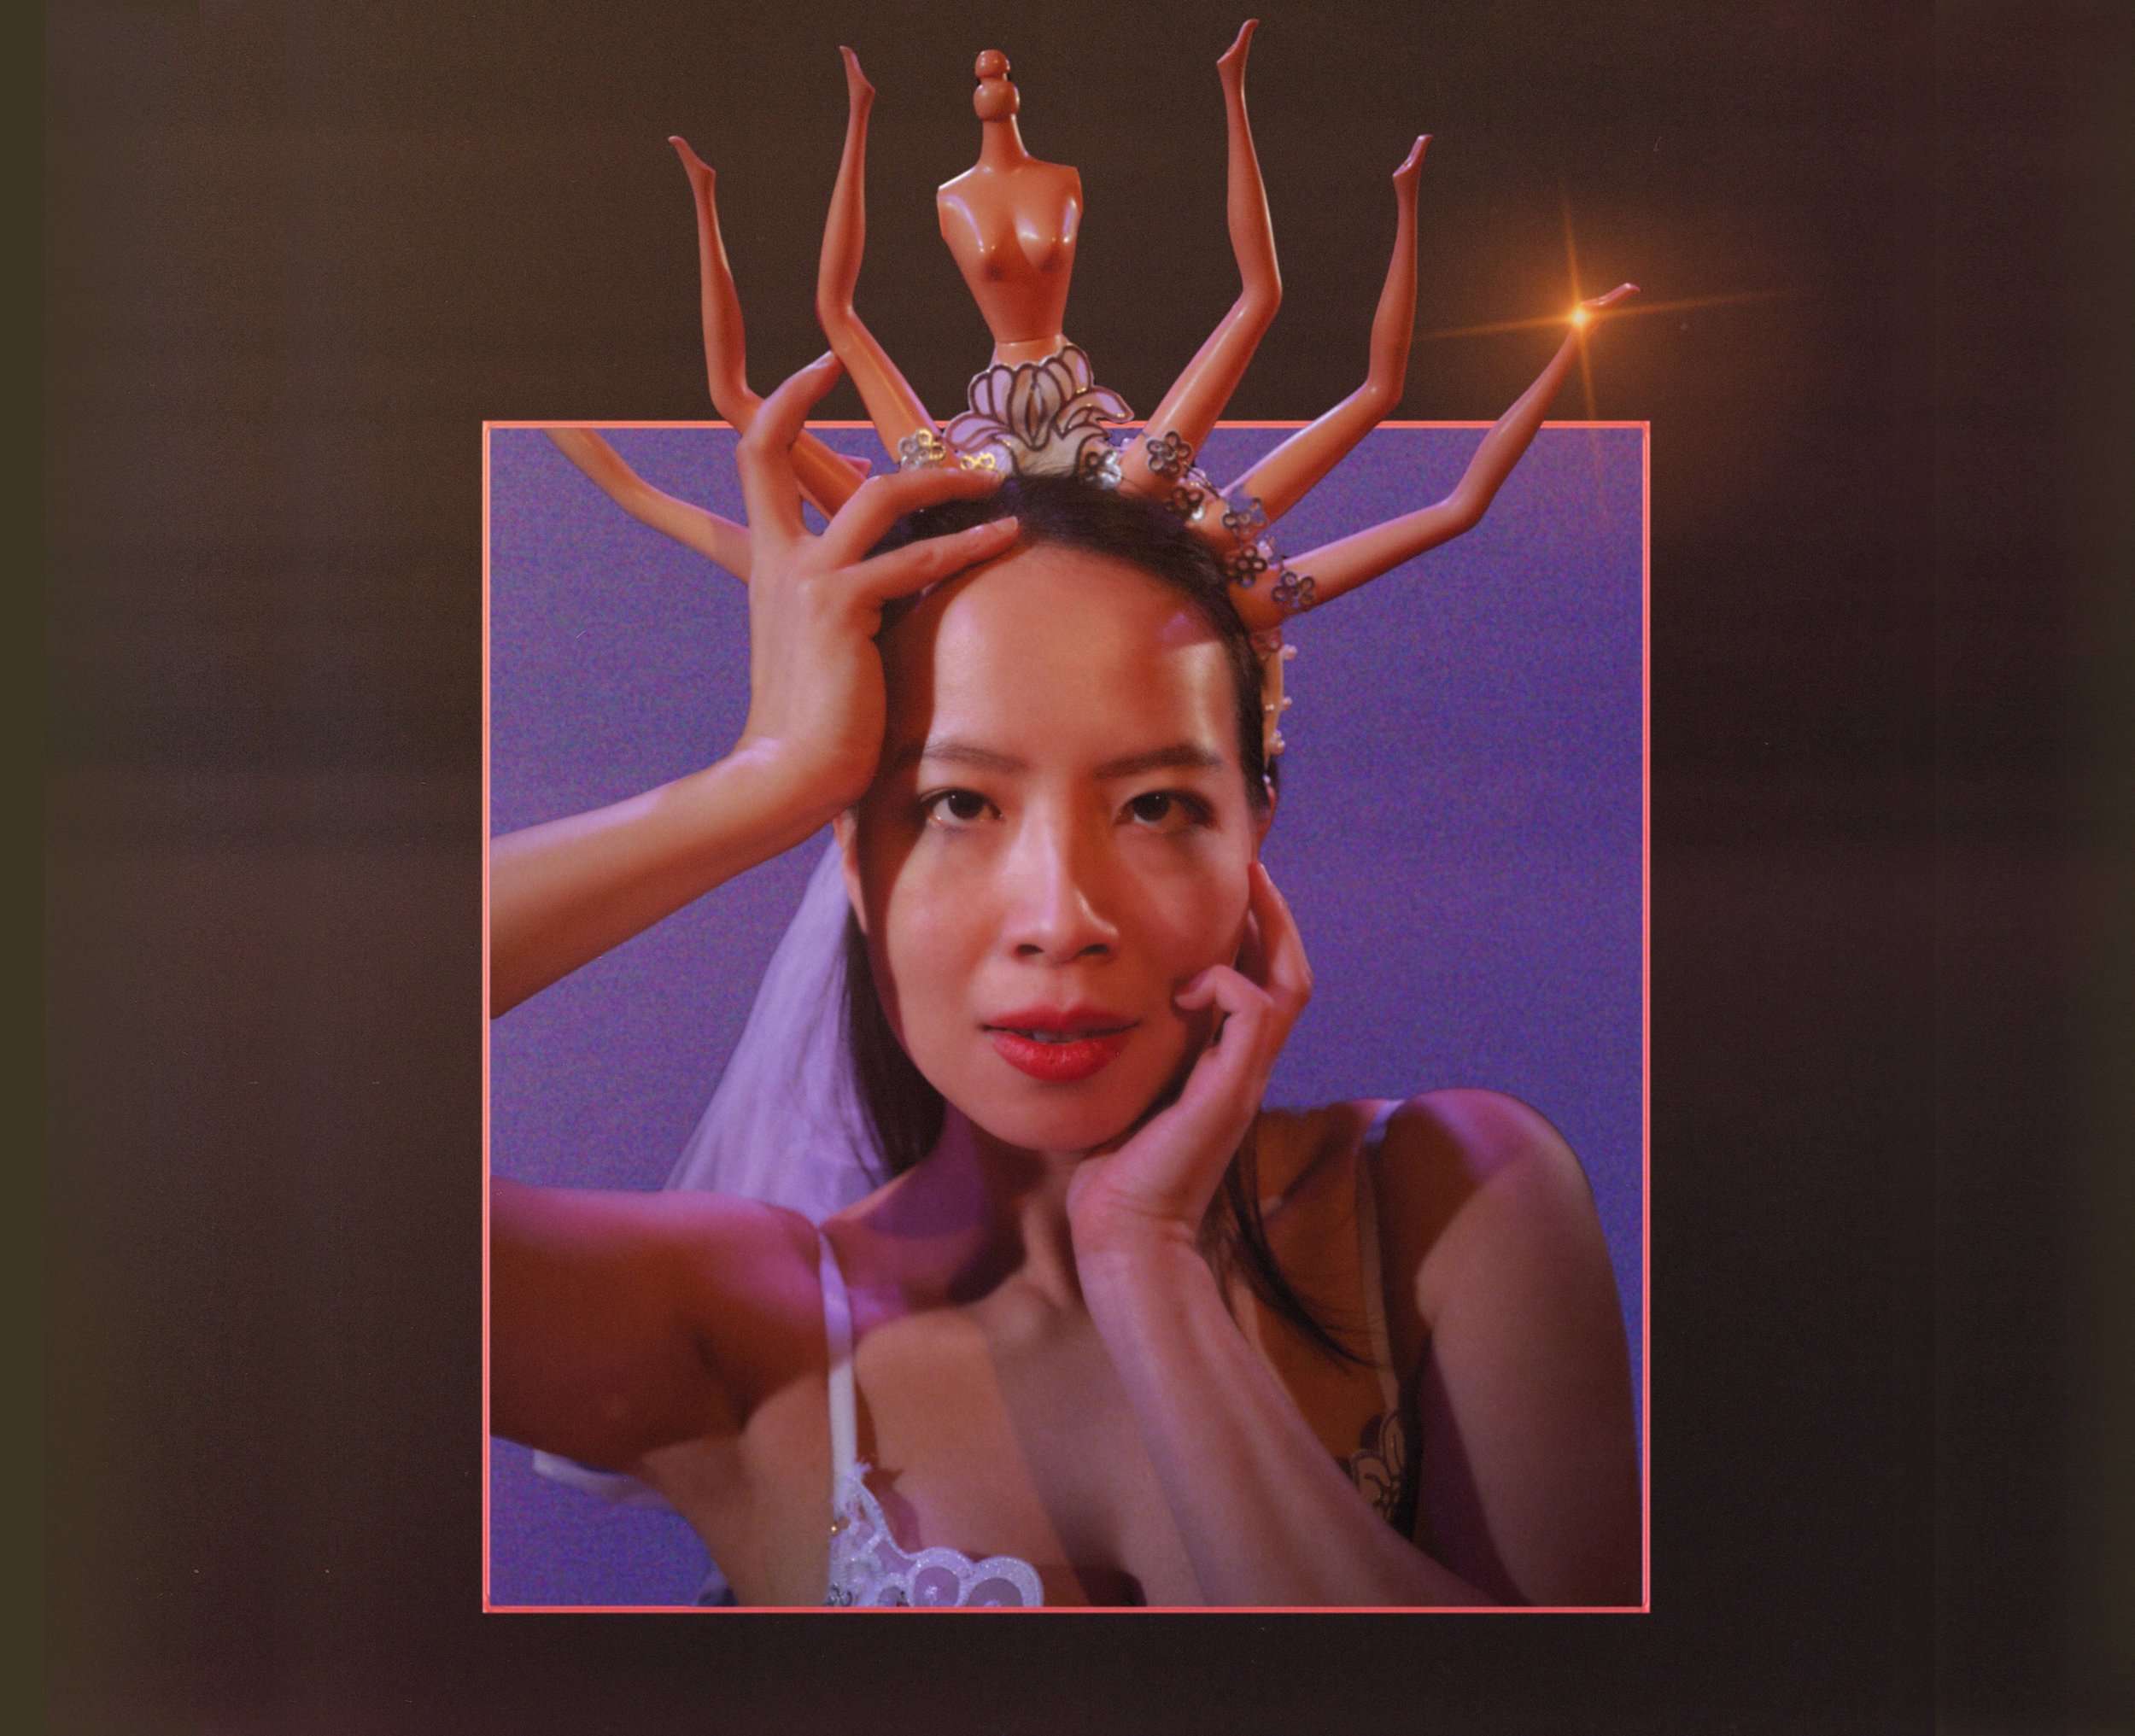  An East Asian woman strikes a post at the camera. She is wearing a white wedding train and a tiara made of Barbie Doll body parts 